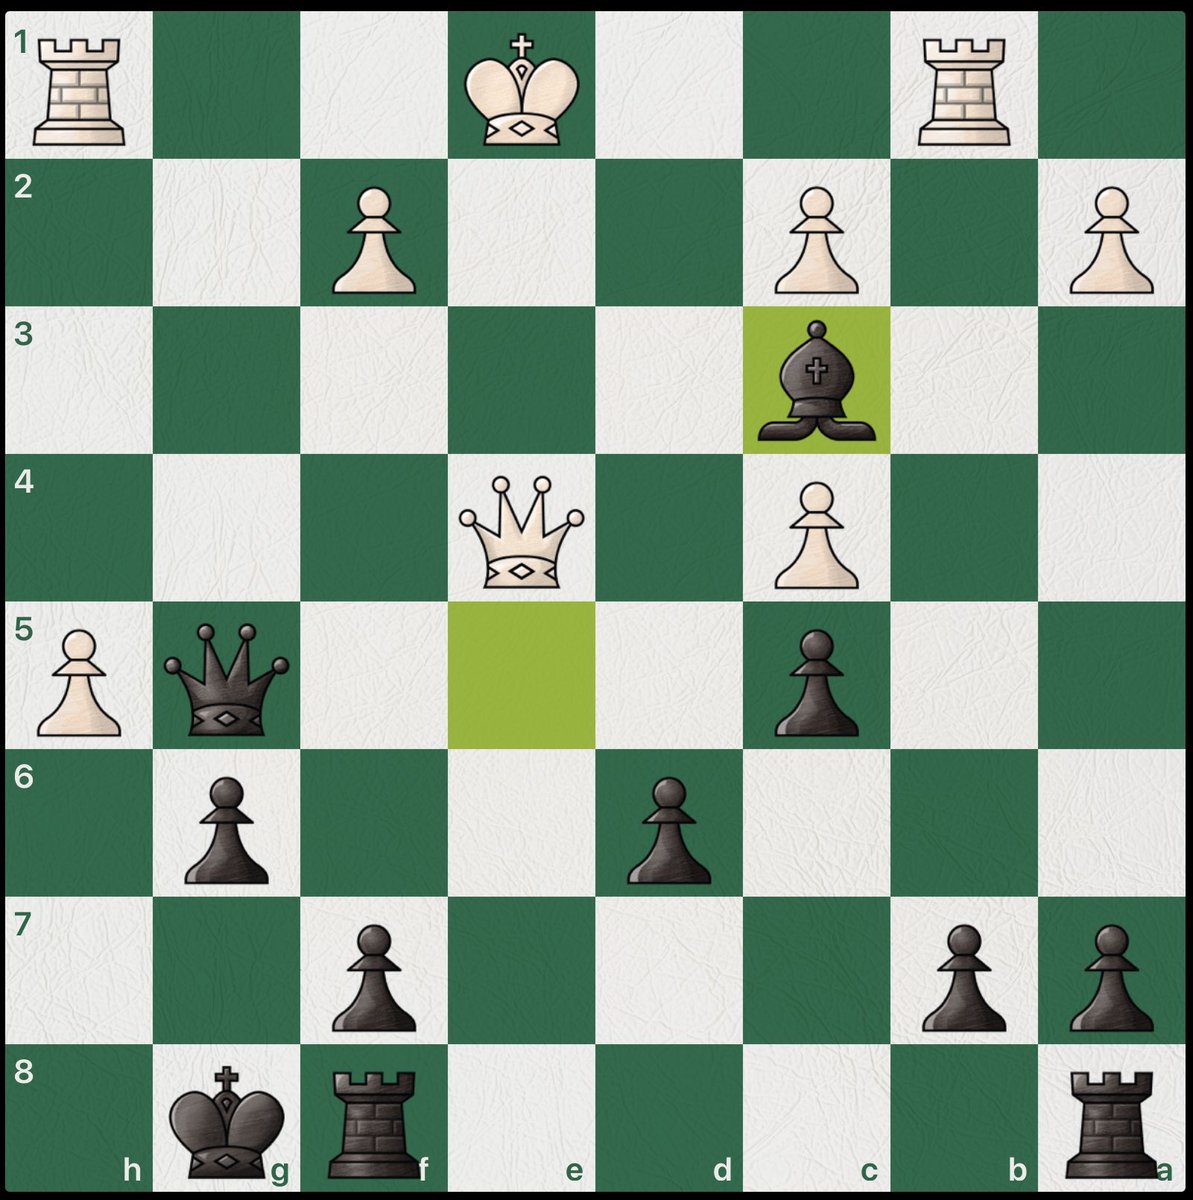 White played 23 moves without castling. This is the #1 strategy to help you win more game as as a 1400. There are always exceptions but you should be playing towards the mold at this level. #chess #chessenjoyer How long before you castle?